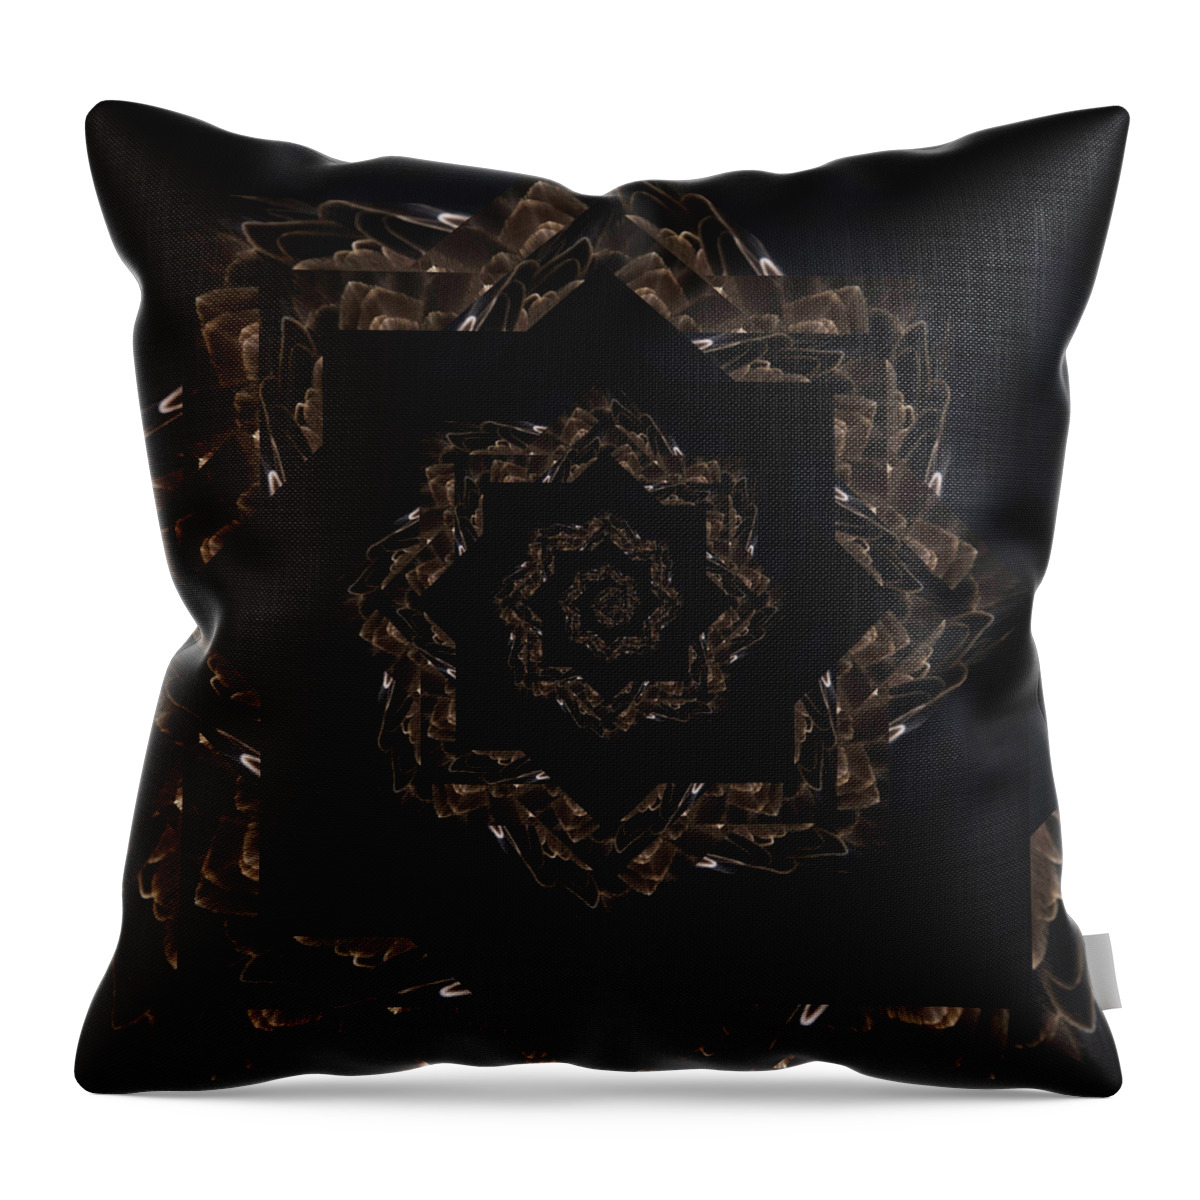 Grid Throw Pillow featuring the digital art Infinity Tunnel Star Eagle Feathers by Pelo Blanco Photo